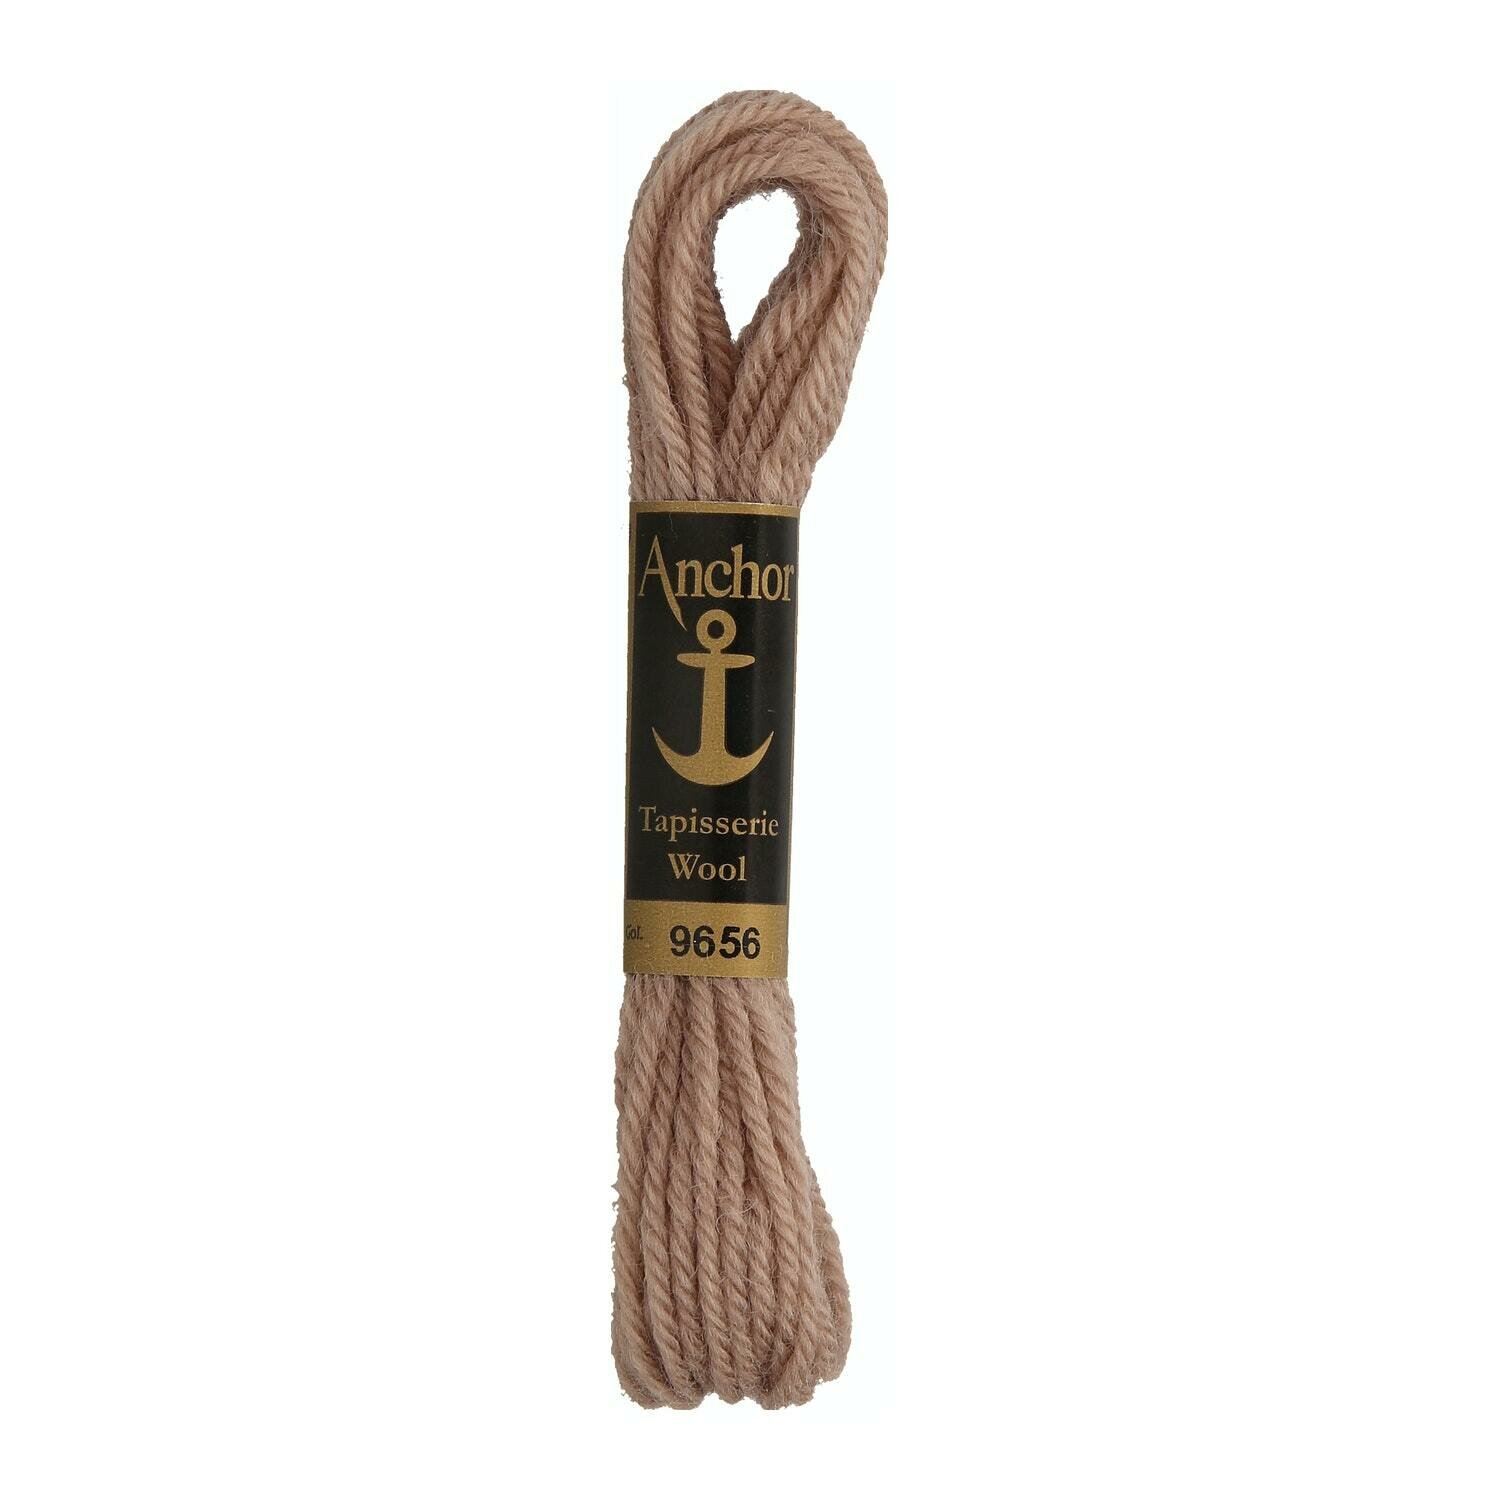 Anchor Tapisserie Wool # 09656